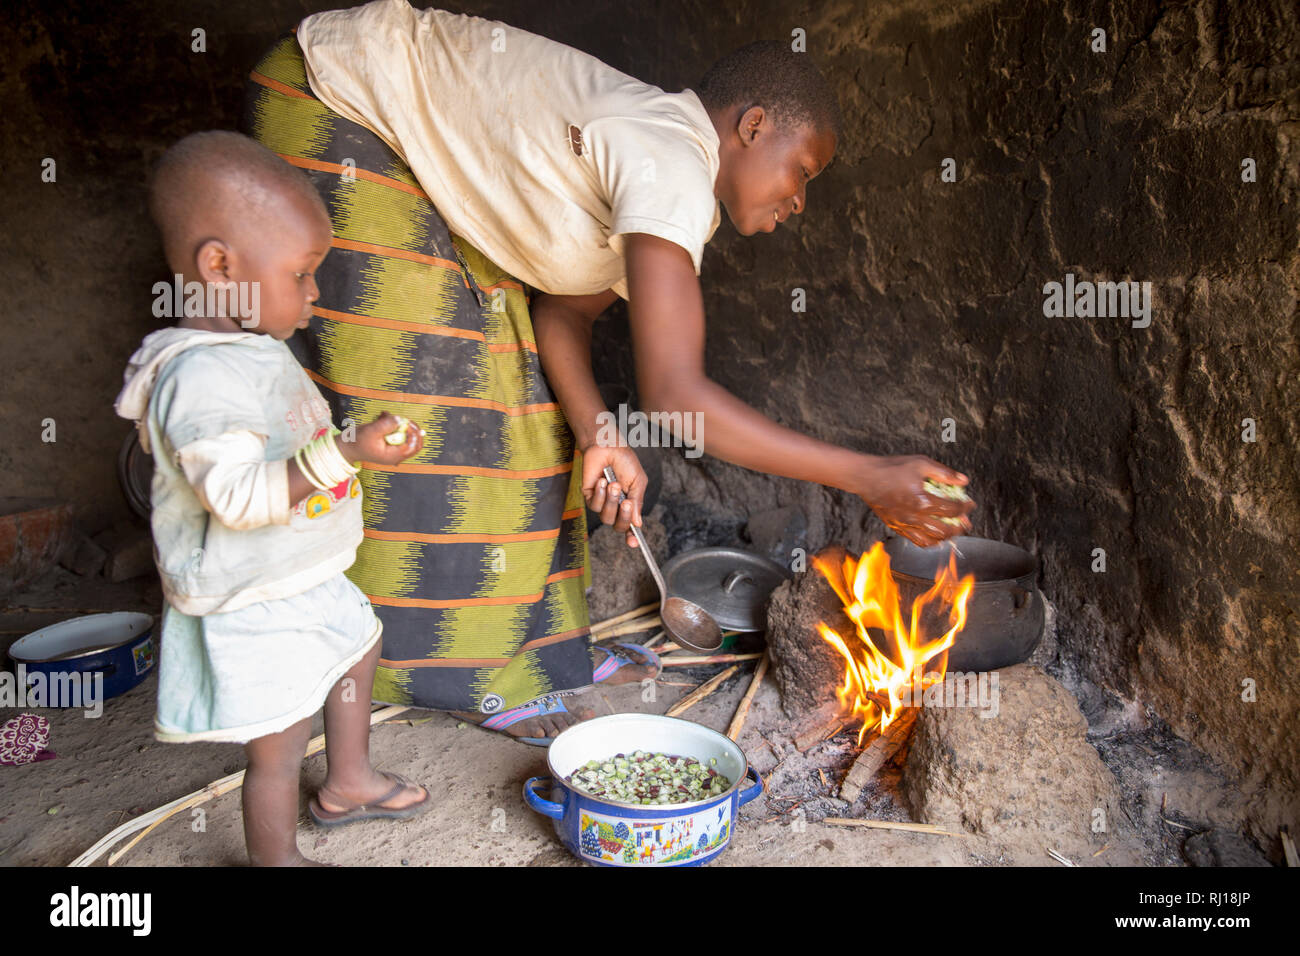 Samba village, Yako Province, Burkina Faso : Collette Guiguemde, 26 with her baby Ornela Divine Zoundi, 18 months, cooks a meal for her children and her parents-in-law with the okra she has just harvested. Stock Photo